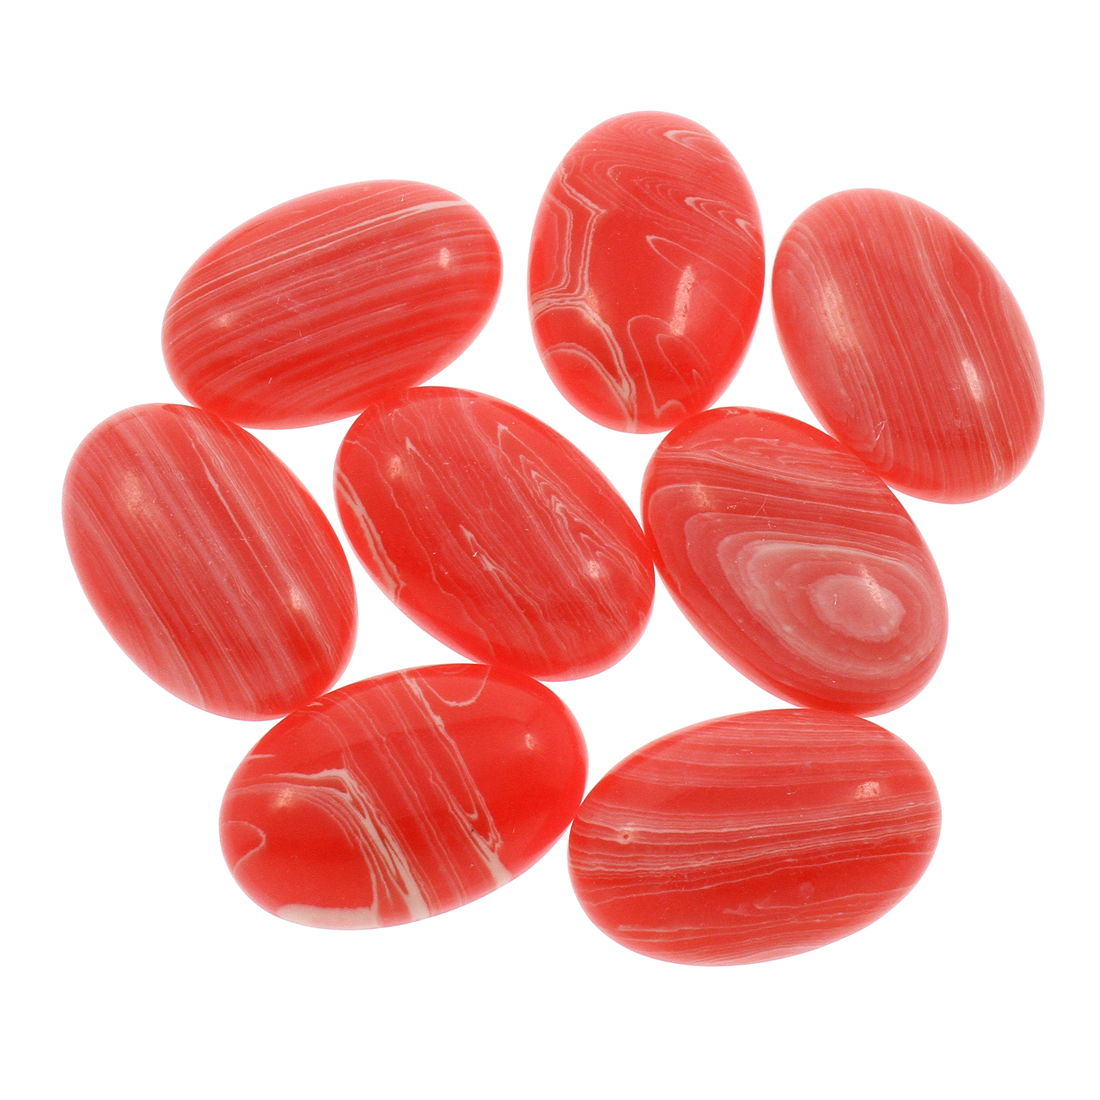 10:deep red agate